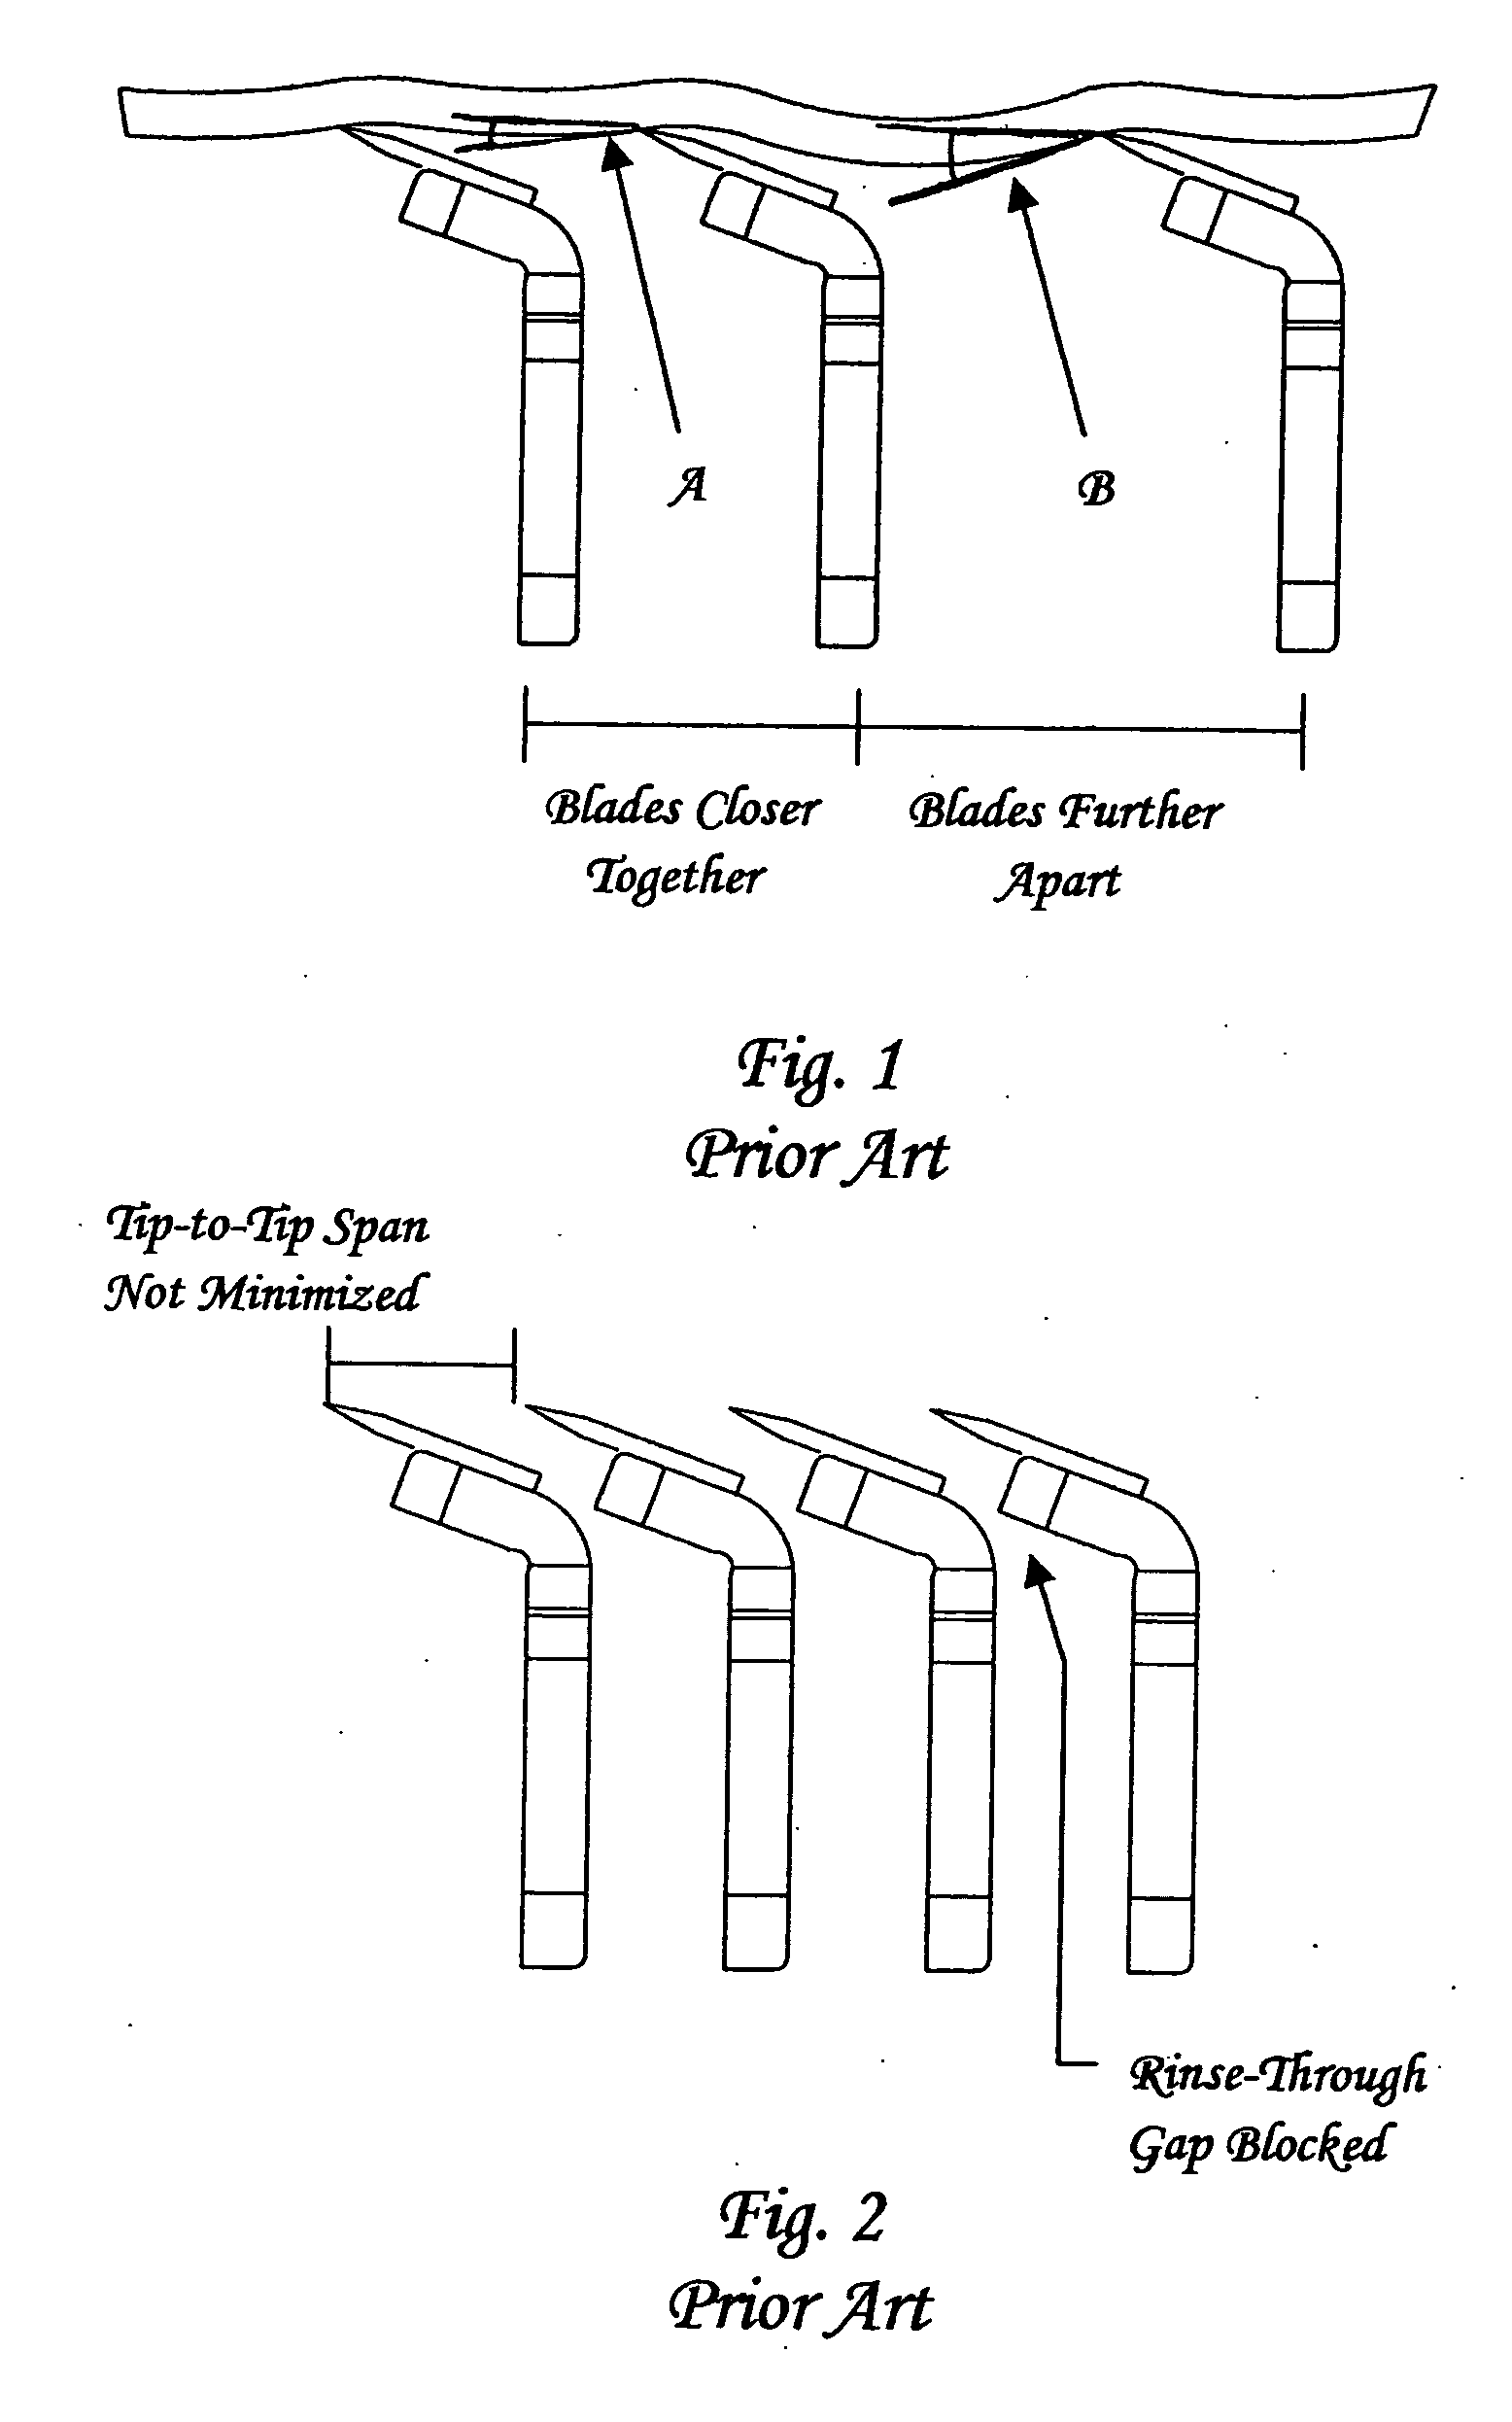 Inter-blade guard and method for manufacturing same